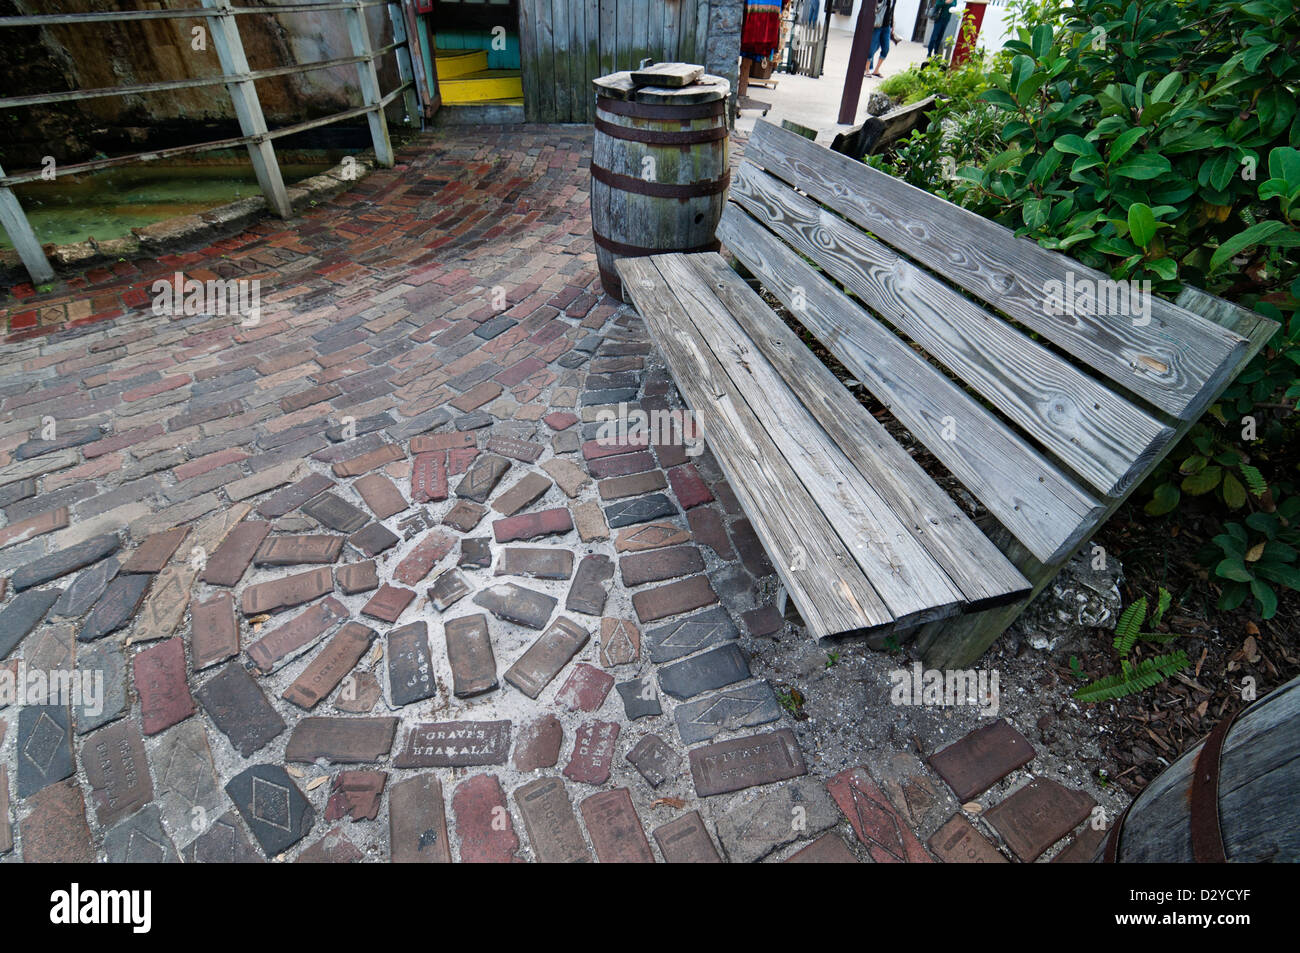 St. Augustine Florida.  Old paving bricks in a park setting along St. George Street in the historic district. Stock Photo